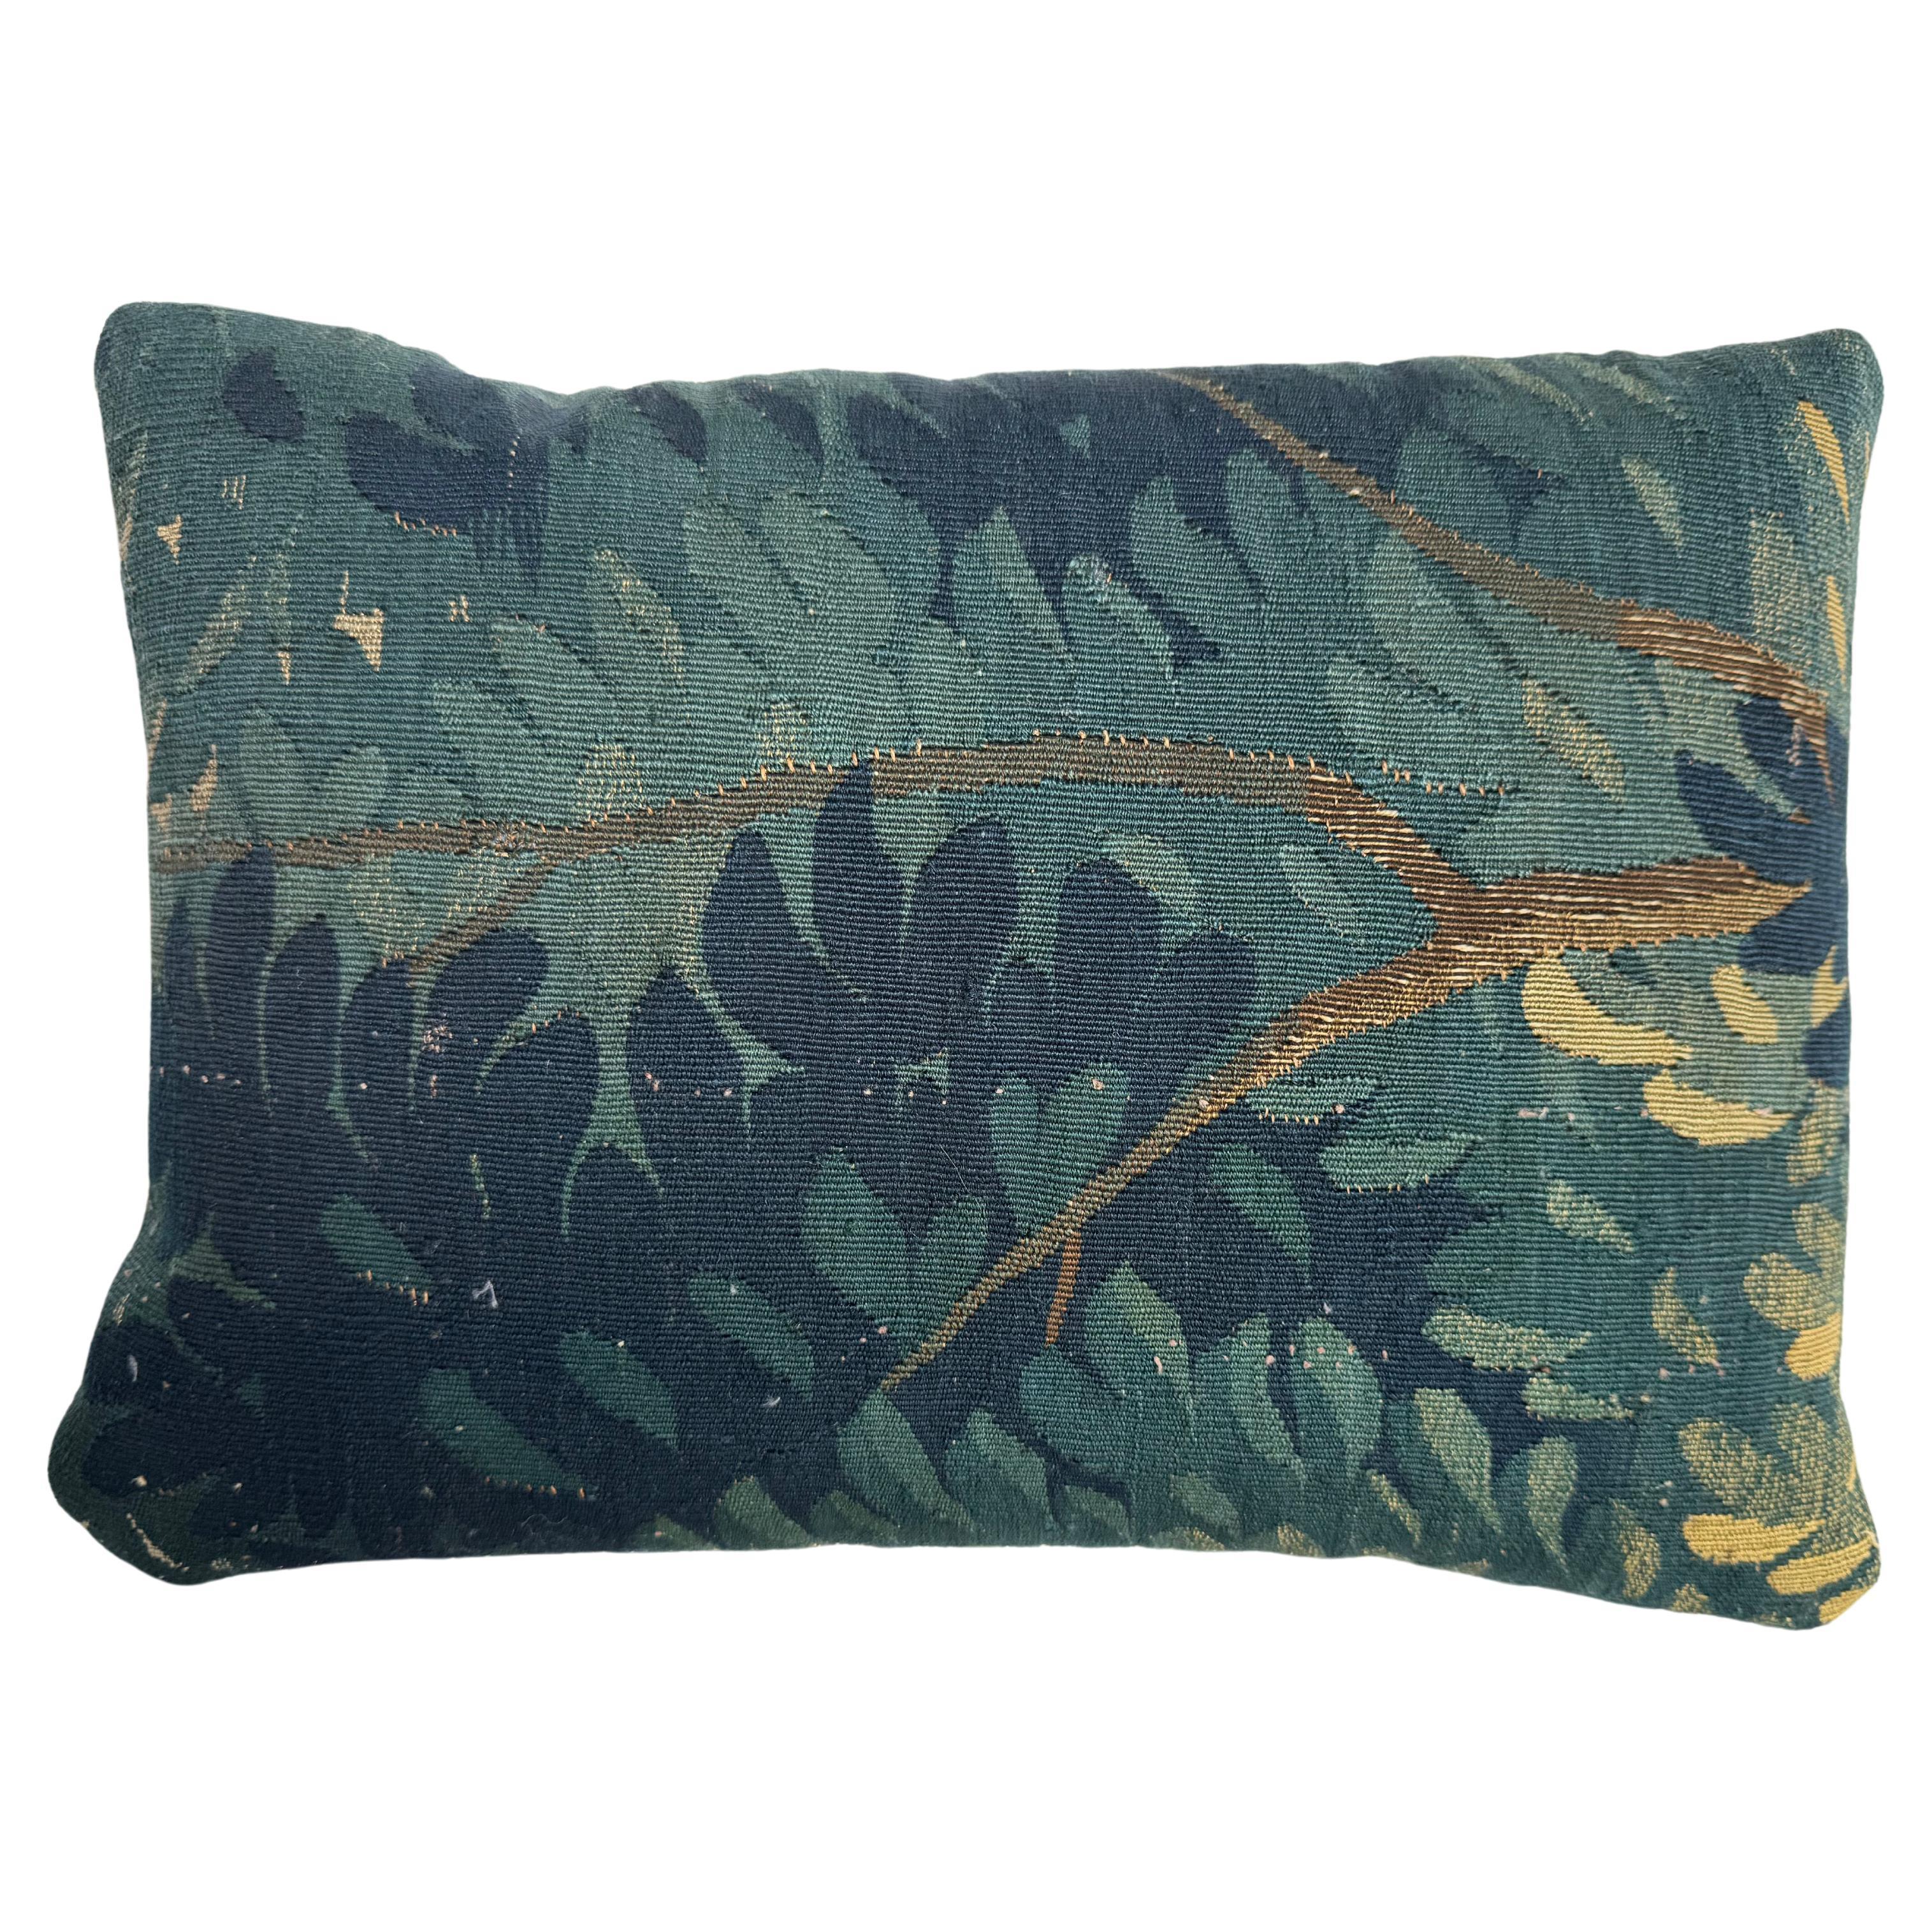 16th century Brussels 13" x 9" Pillow For Sale